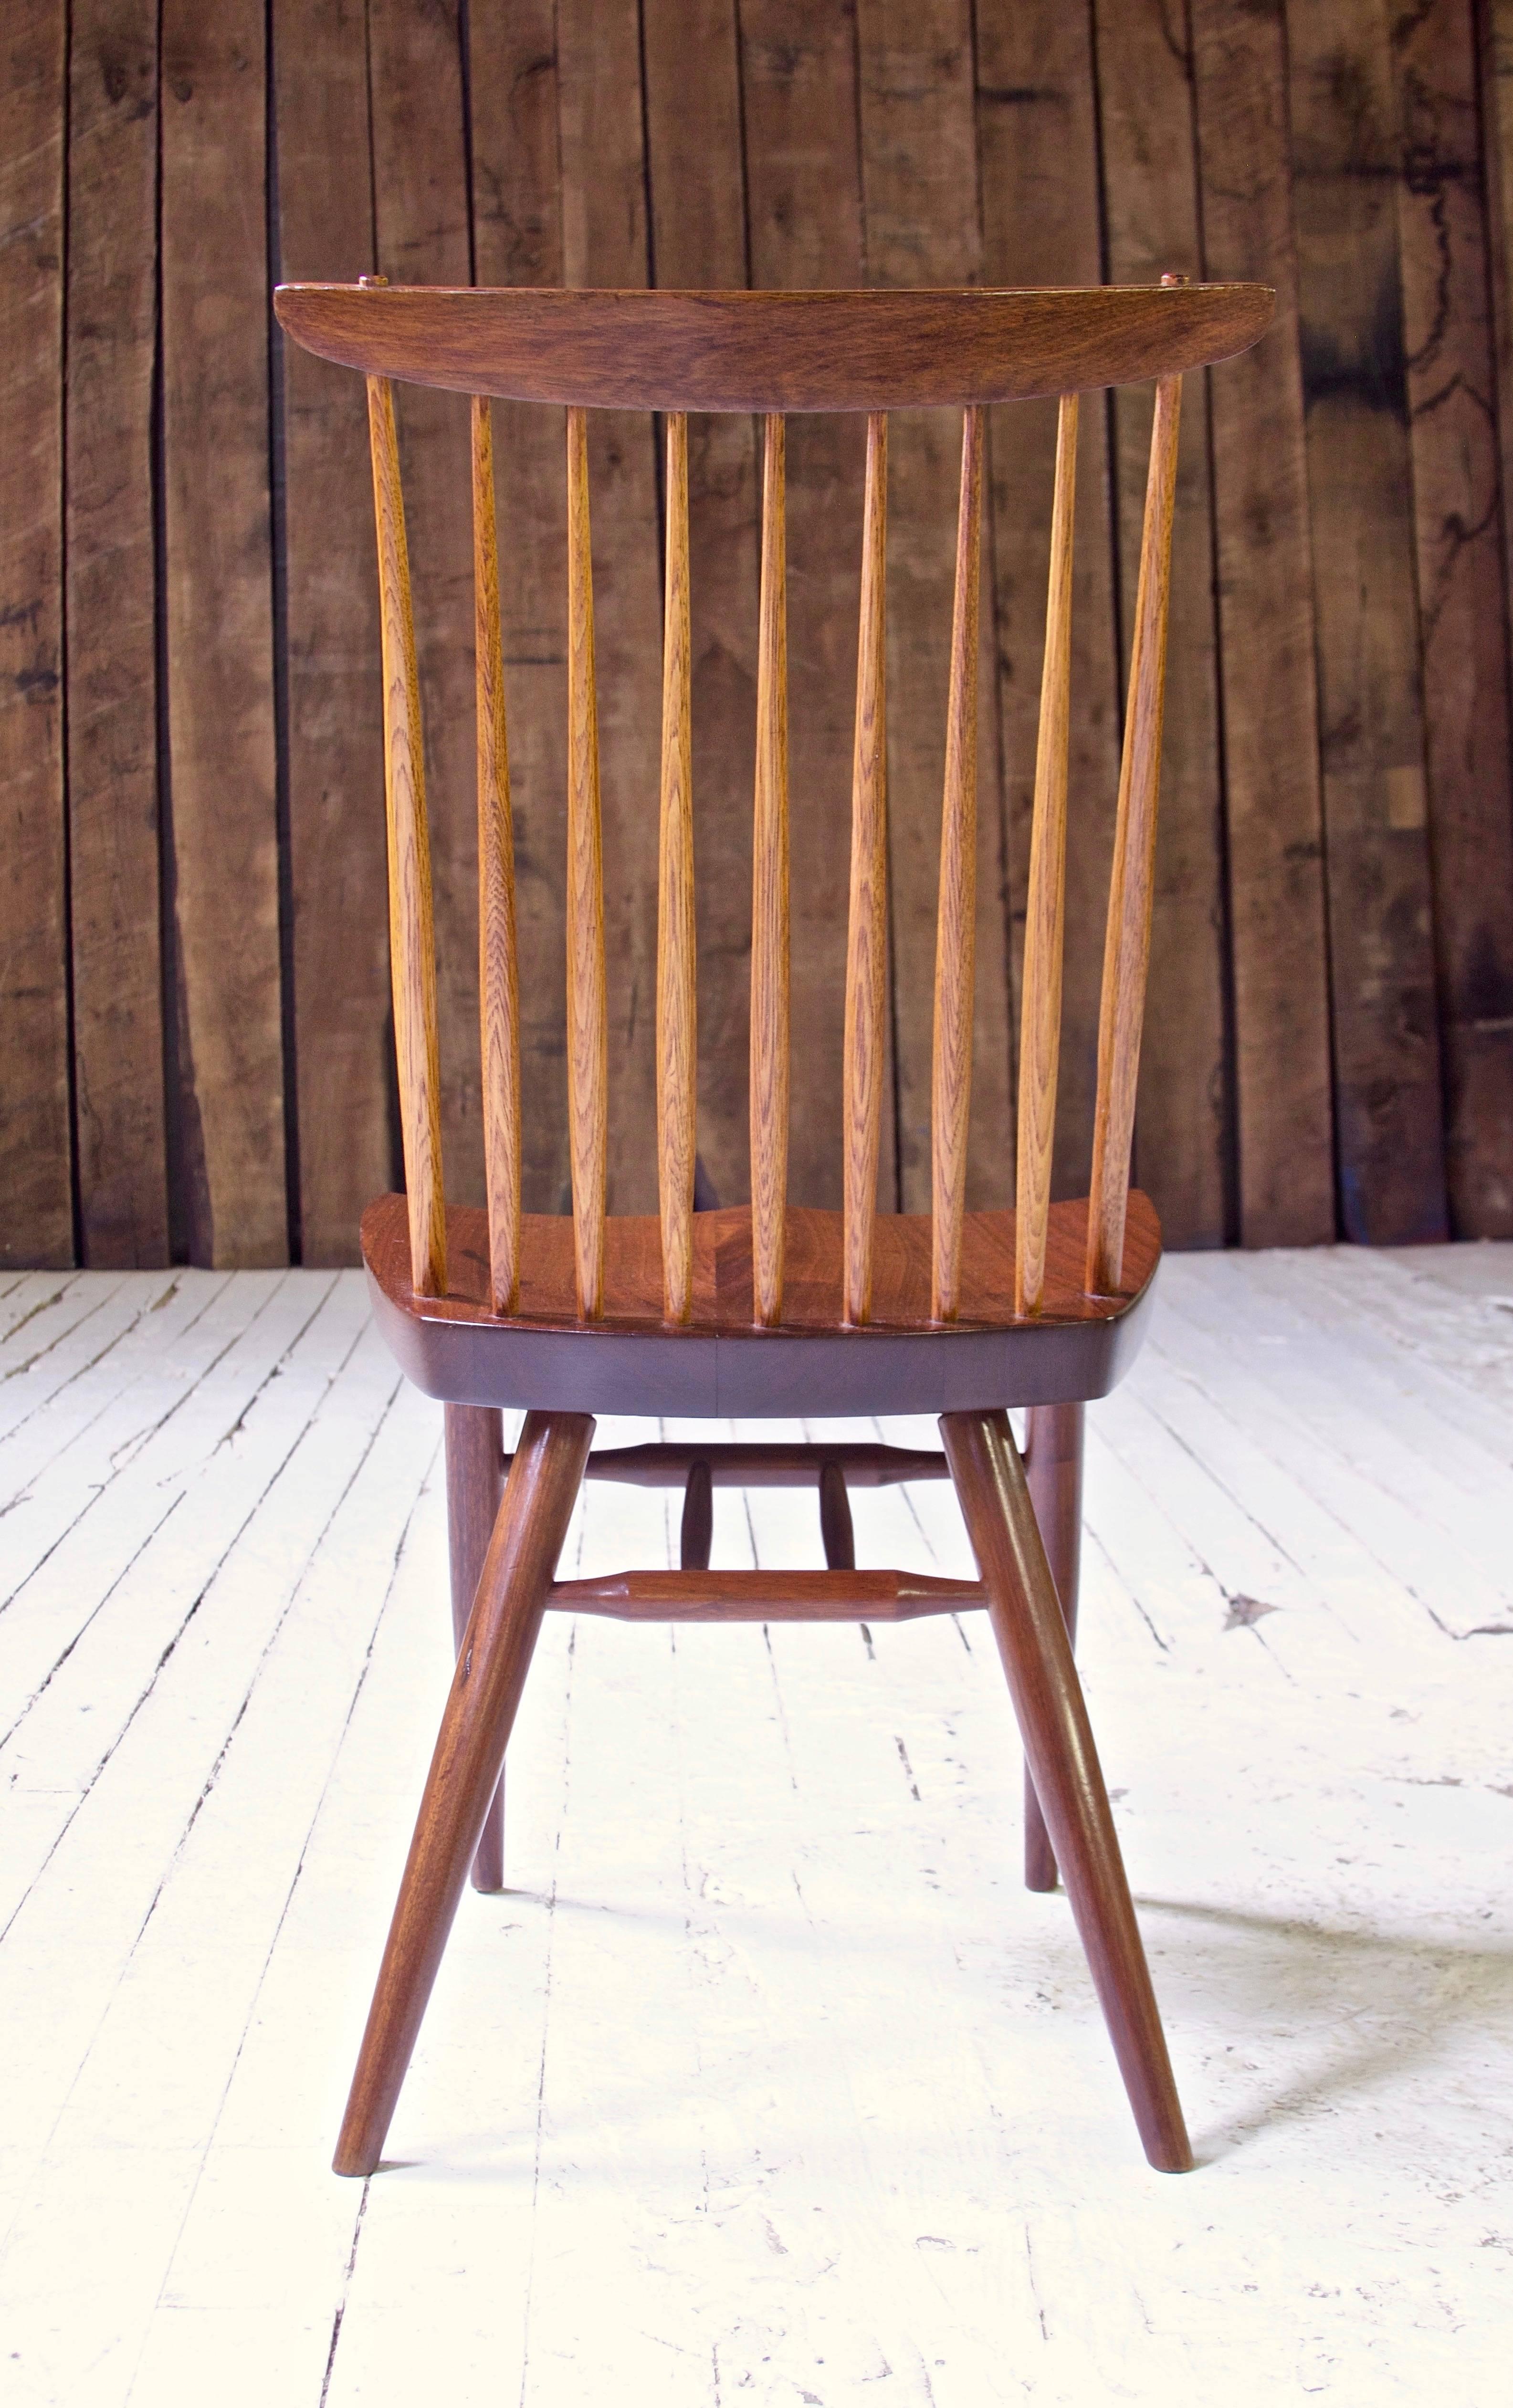 A well-preserved early 'New Chair' in black walnut and hickory, handmade by George Nakashima in his New Hope studio in the mid-late 1950s. Handplane and chisel marks are visible on the hand-hewn Hickory spindles, the turned leg stretchers' tenons